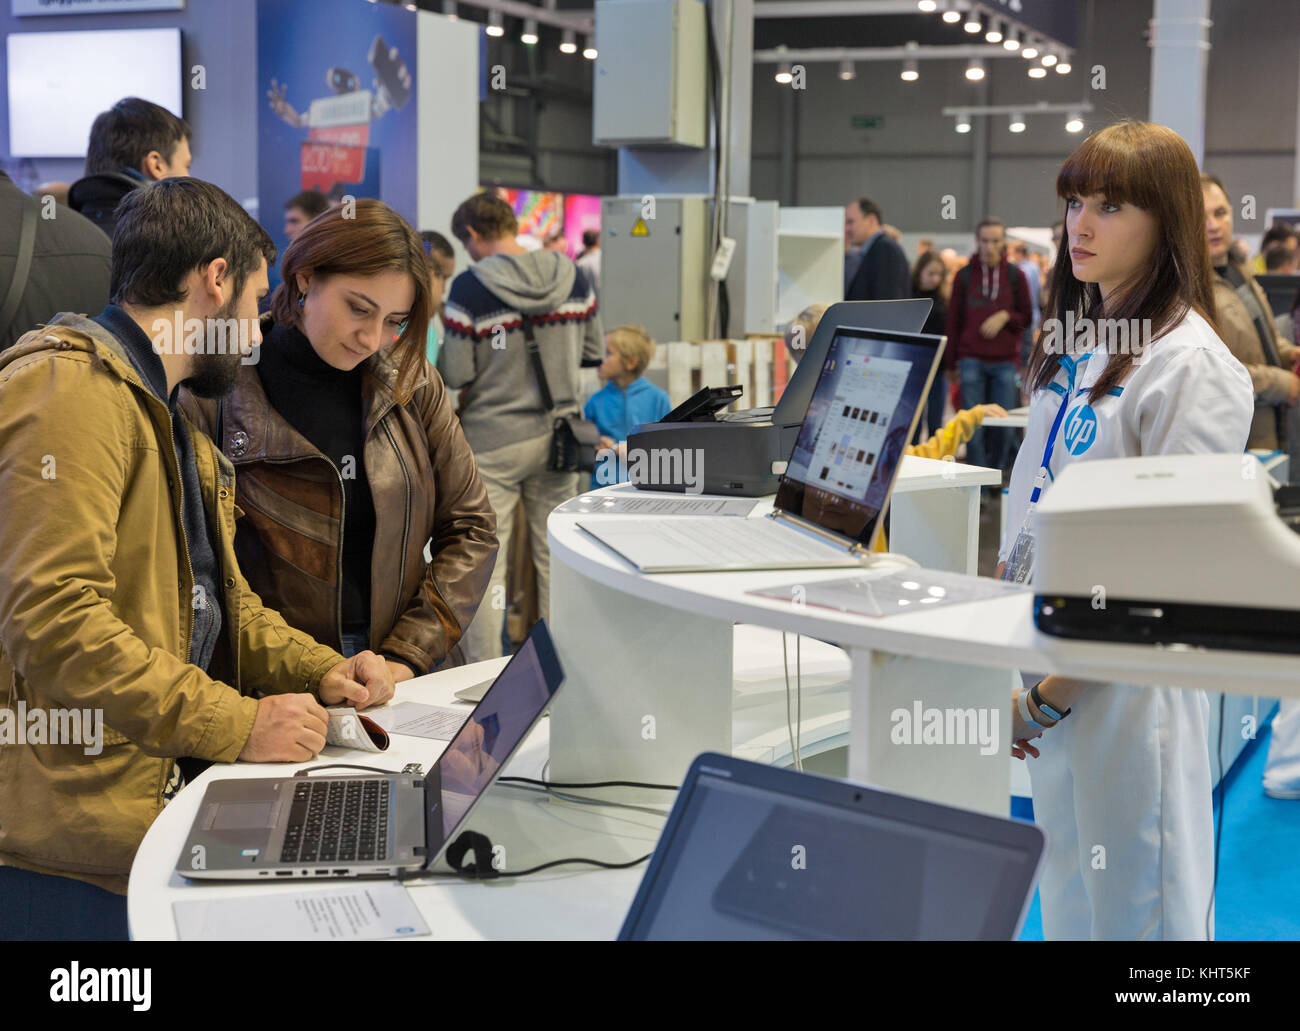 KIEV, UKRAINE - OCTOBER 07, 2017: People visit Hewlett-Packard, American multinational information technology company booth at CEE 2017, largest elect Stock Photo